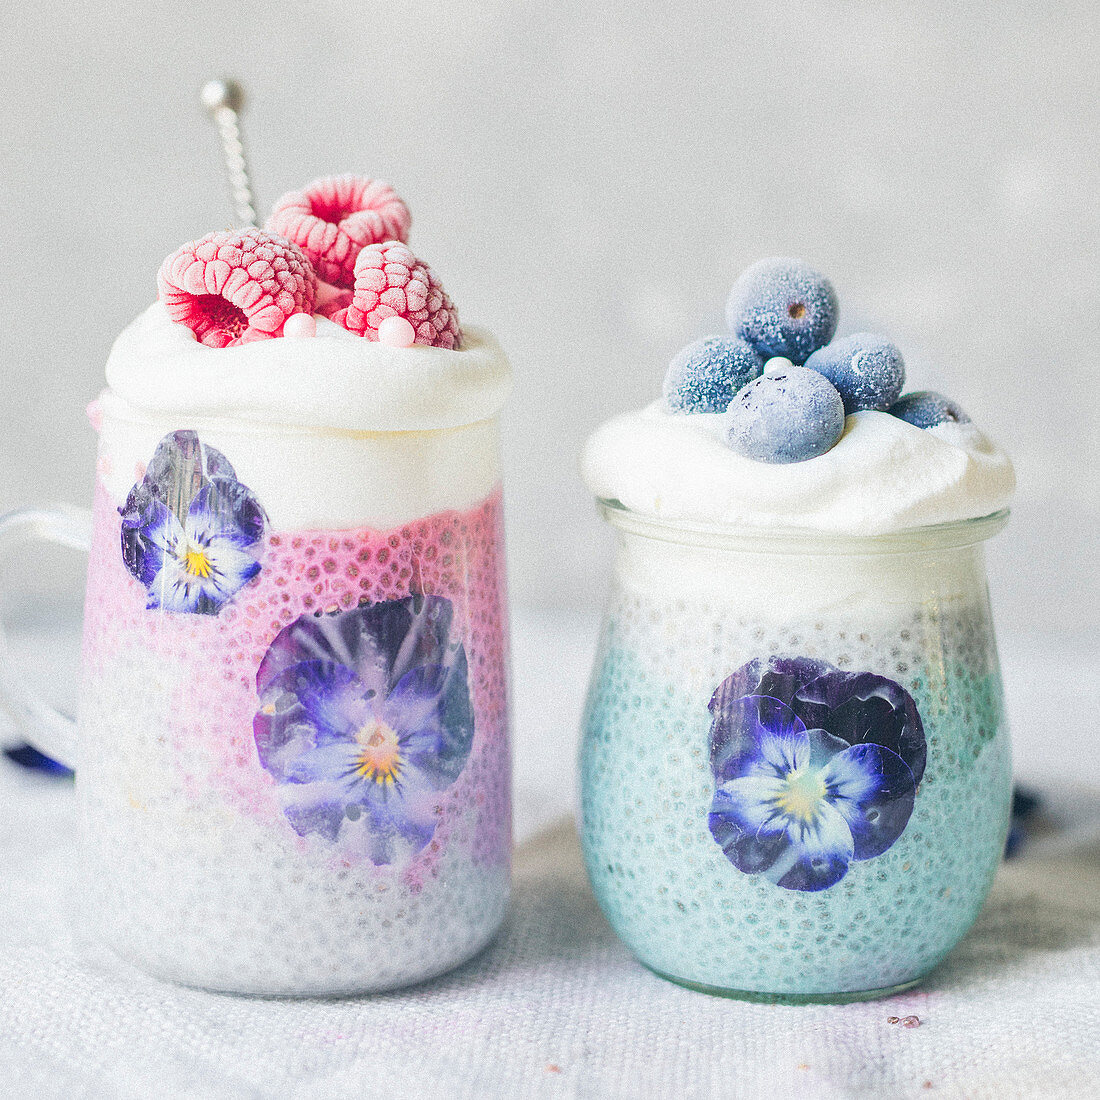 Chia seeds with coconut milk,flower,raspberry and blueberry desserts